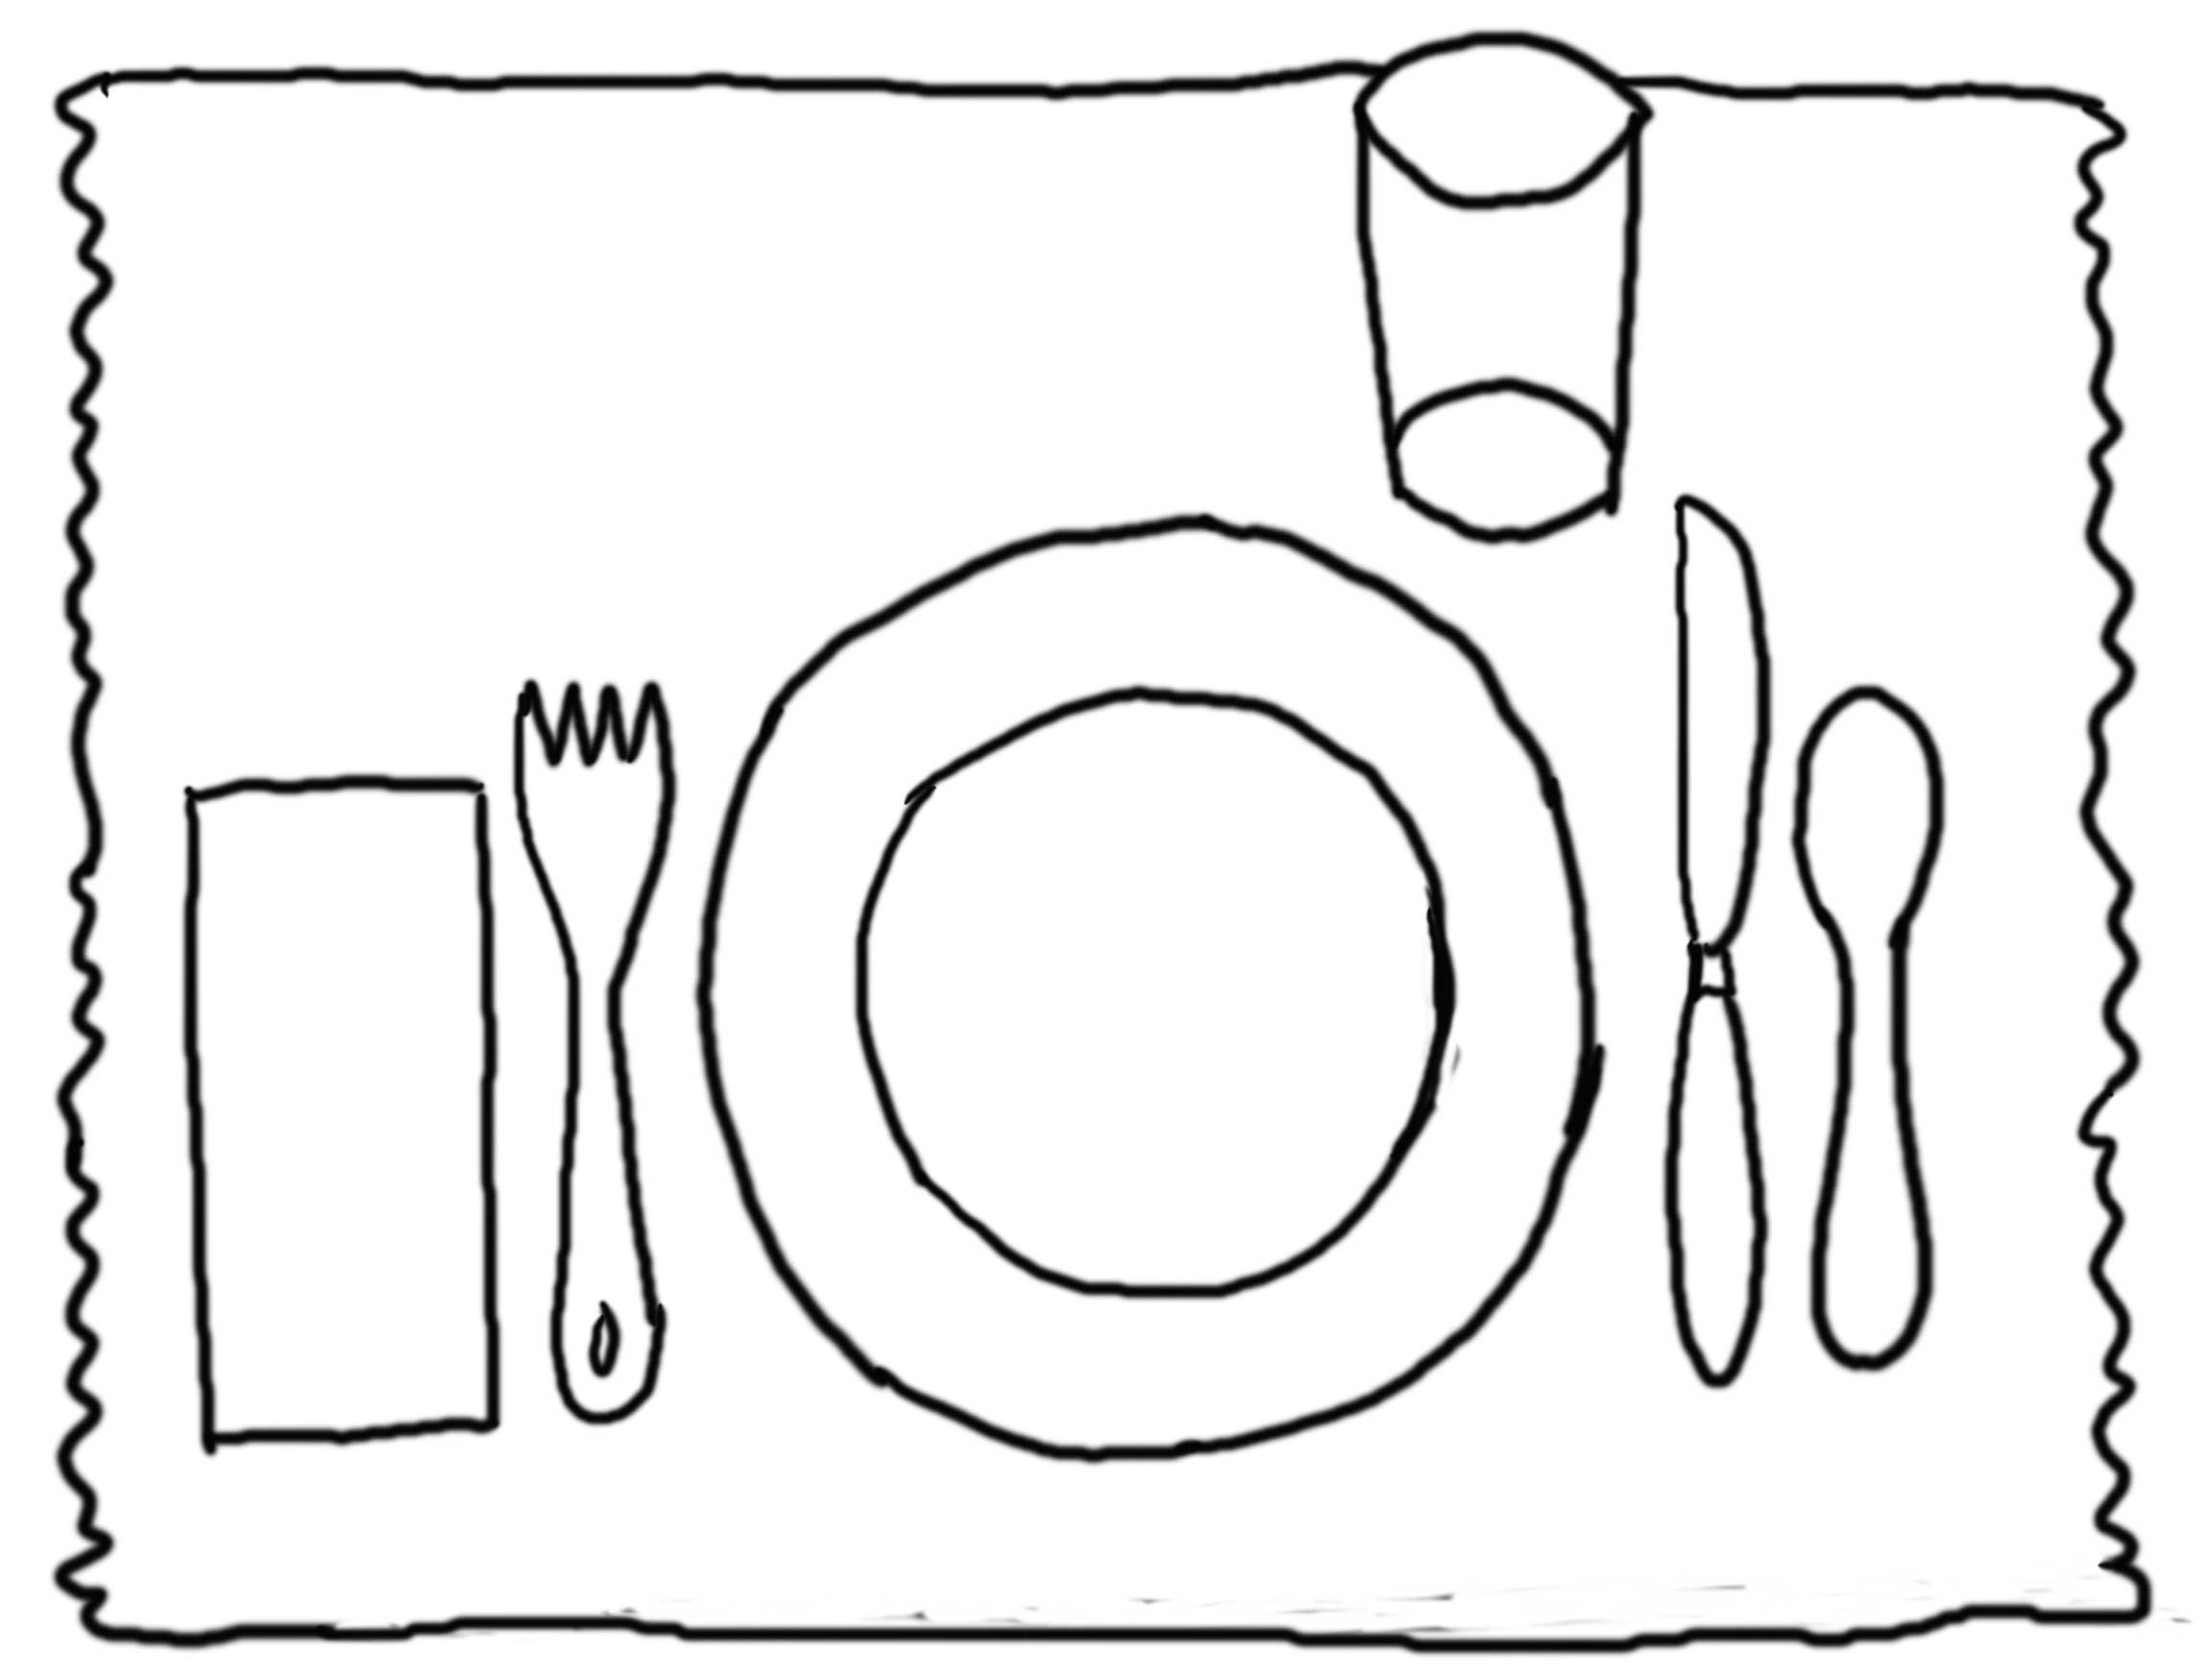 Table Manners Coloring Pages Colorine Net 17928